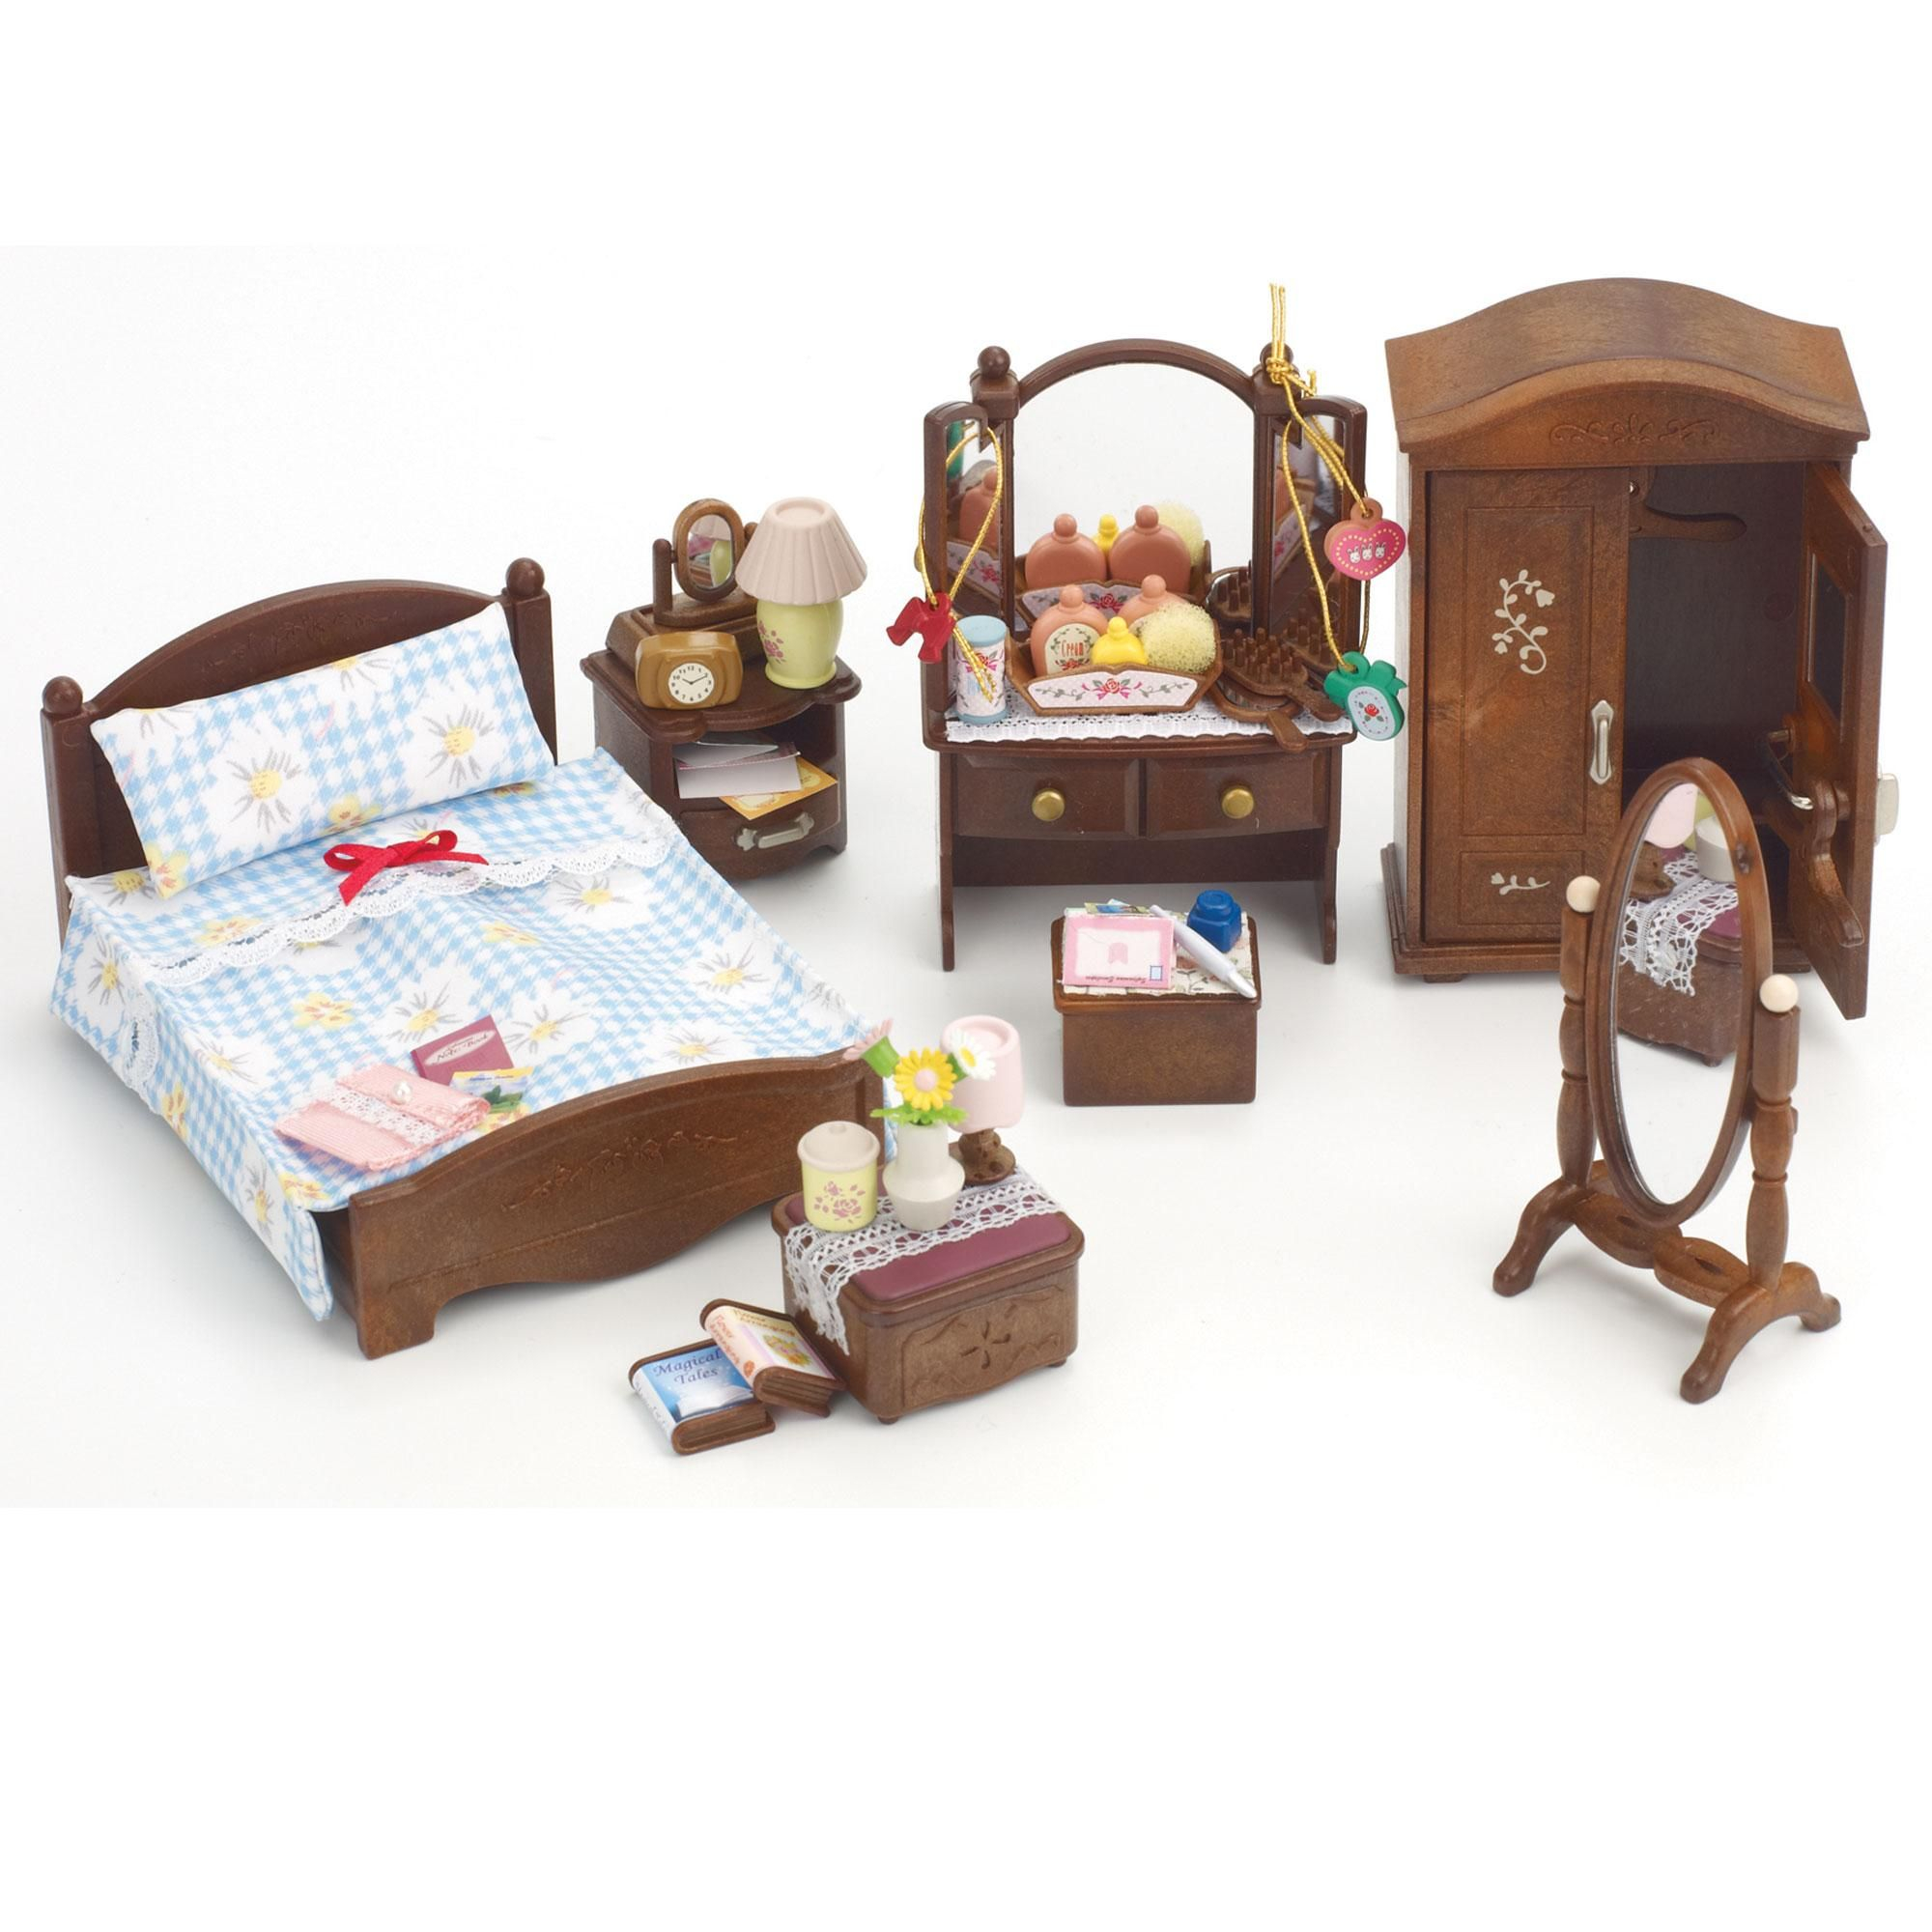 Toys Sylvanian Families Deluxe Master Bedroom Set Cheekii throughout dimensions 2000 X 2000